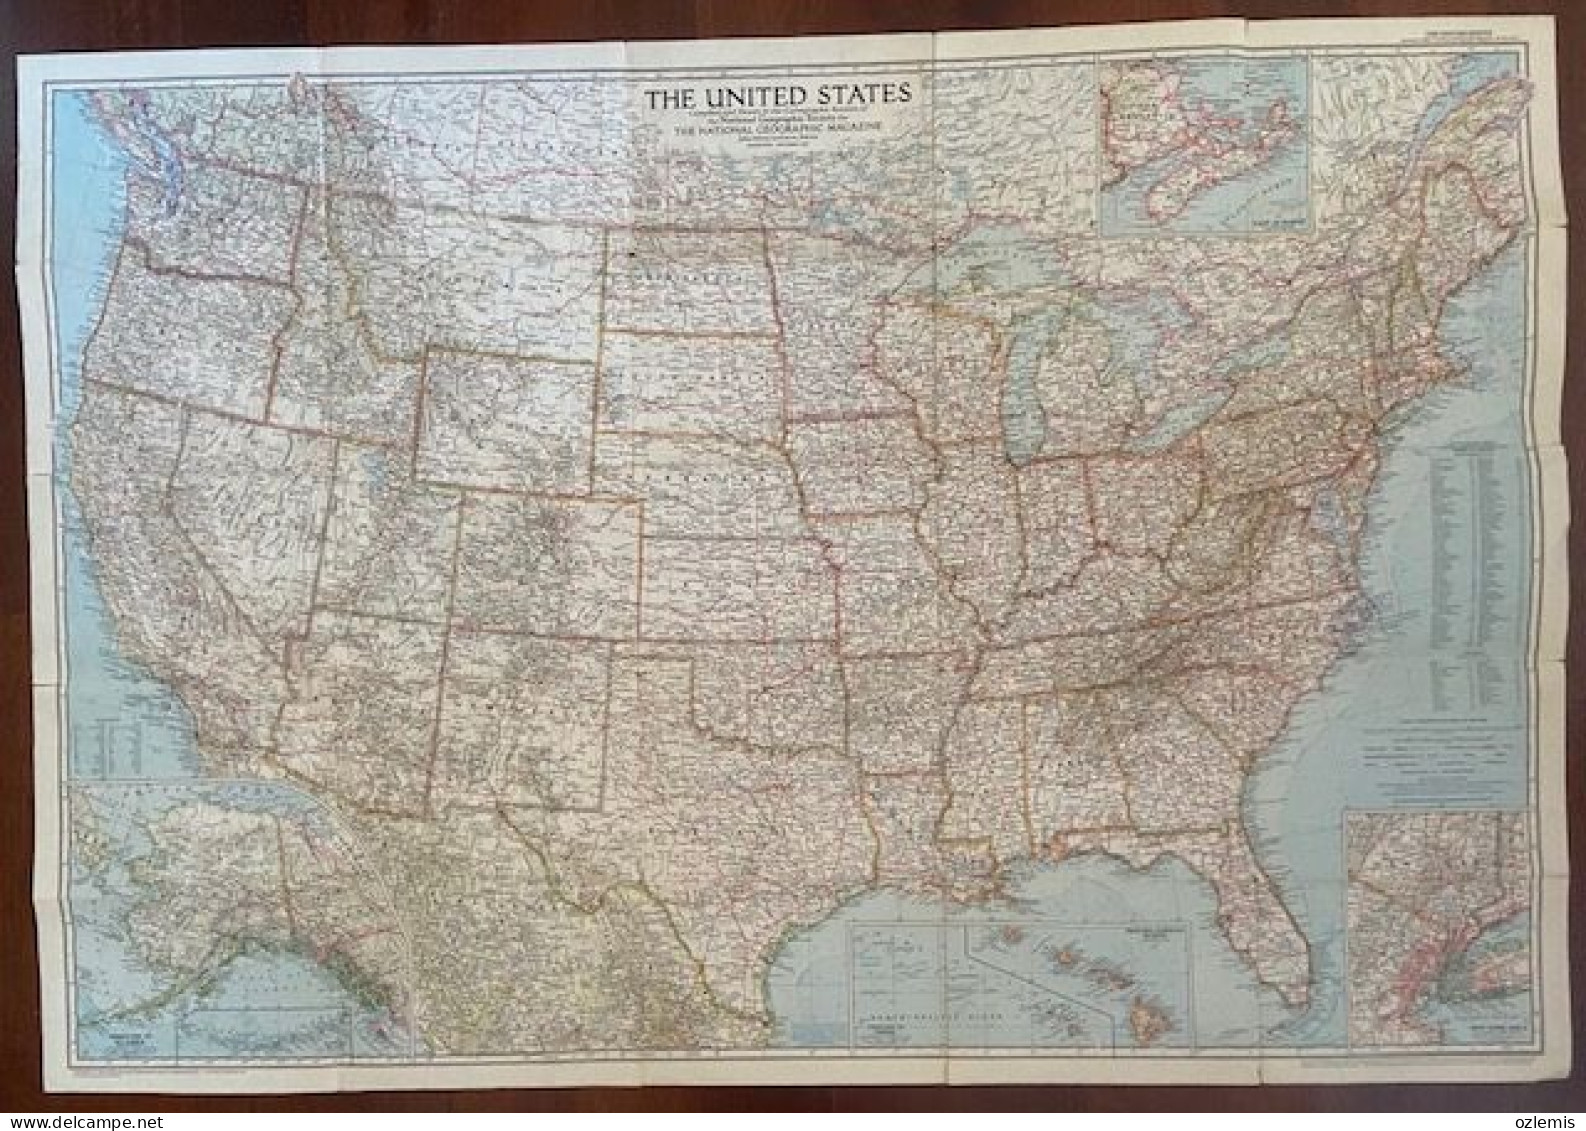 THE UNITED STATES , ,THE NATIONAL GEOGRAPHIC MAGAZINE ,1956 ,MAP - Atlases, Maps